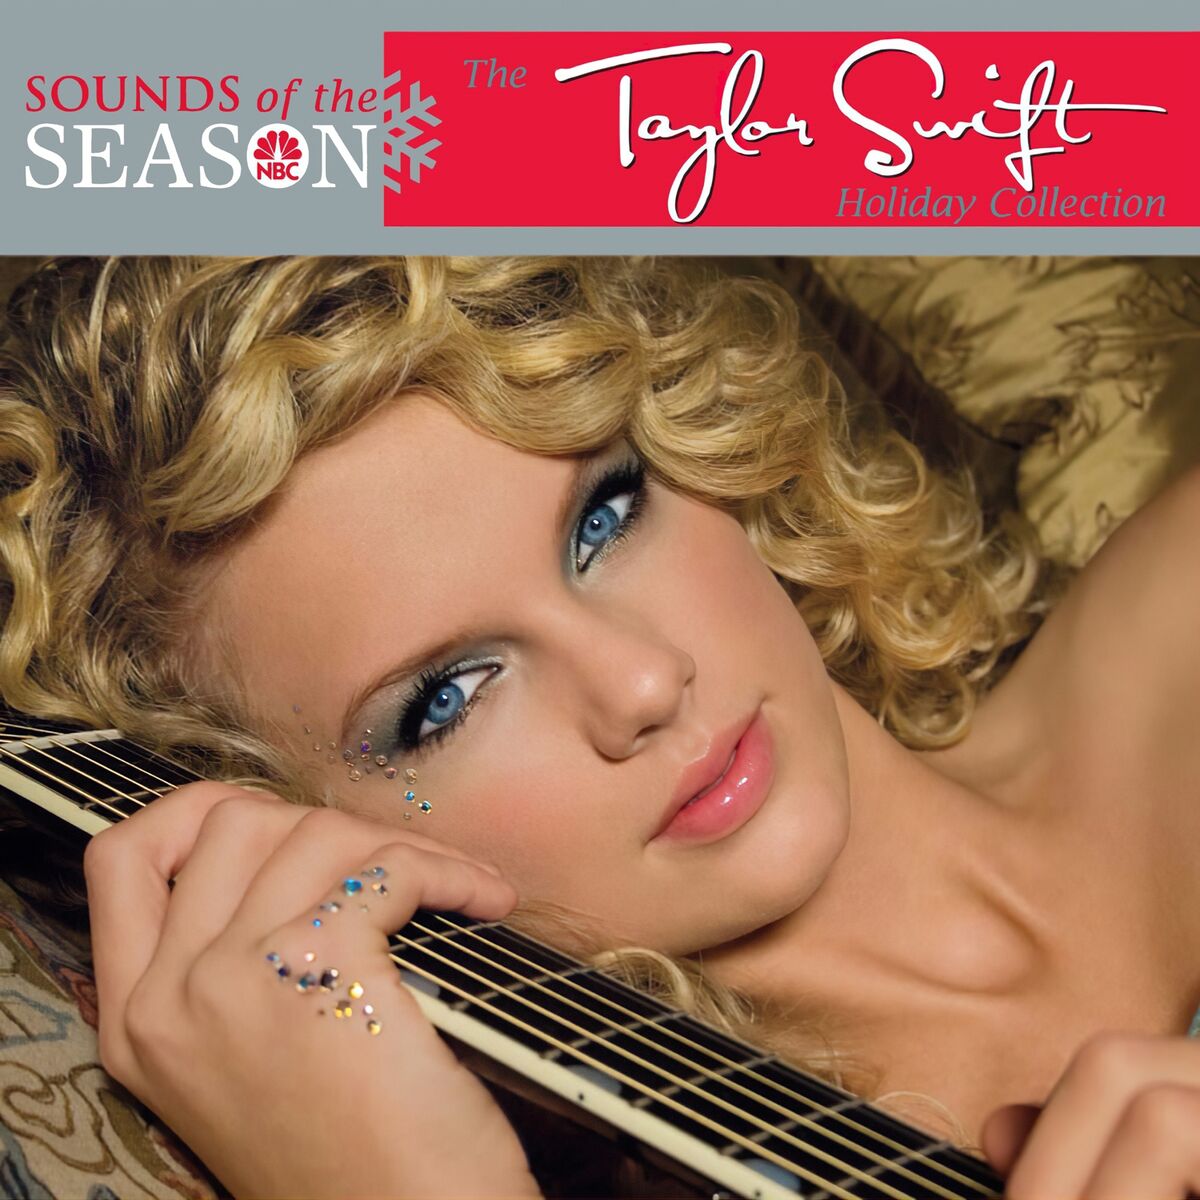 Sounds of the Season The Taylor Swift Holiday Collection Taylor